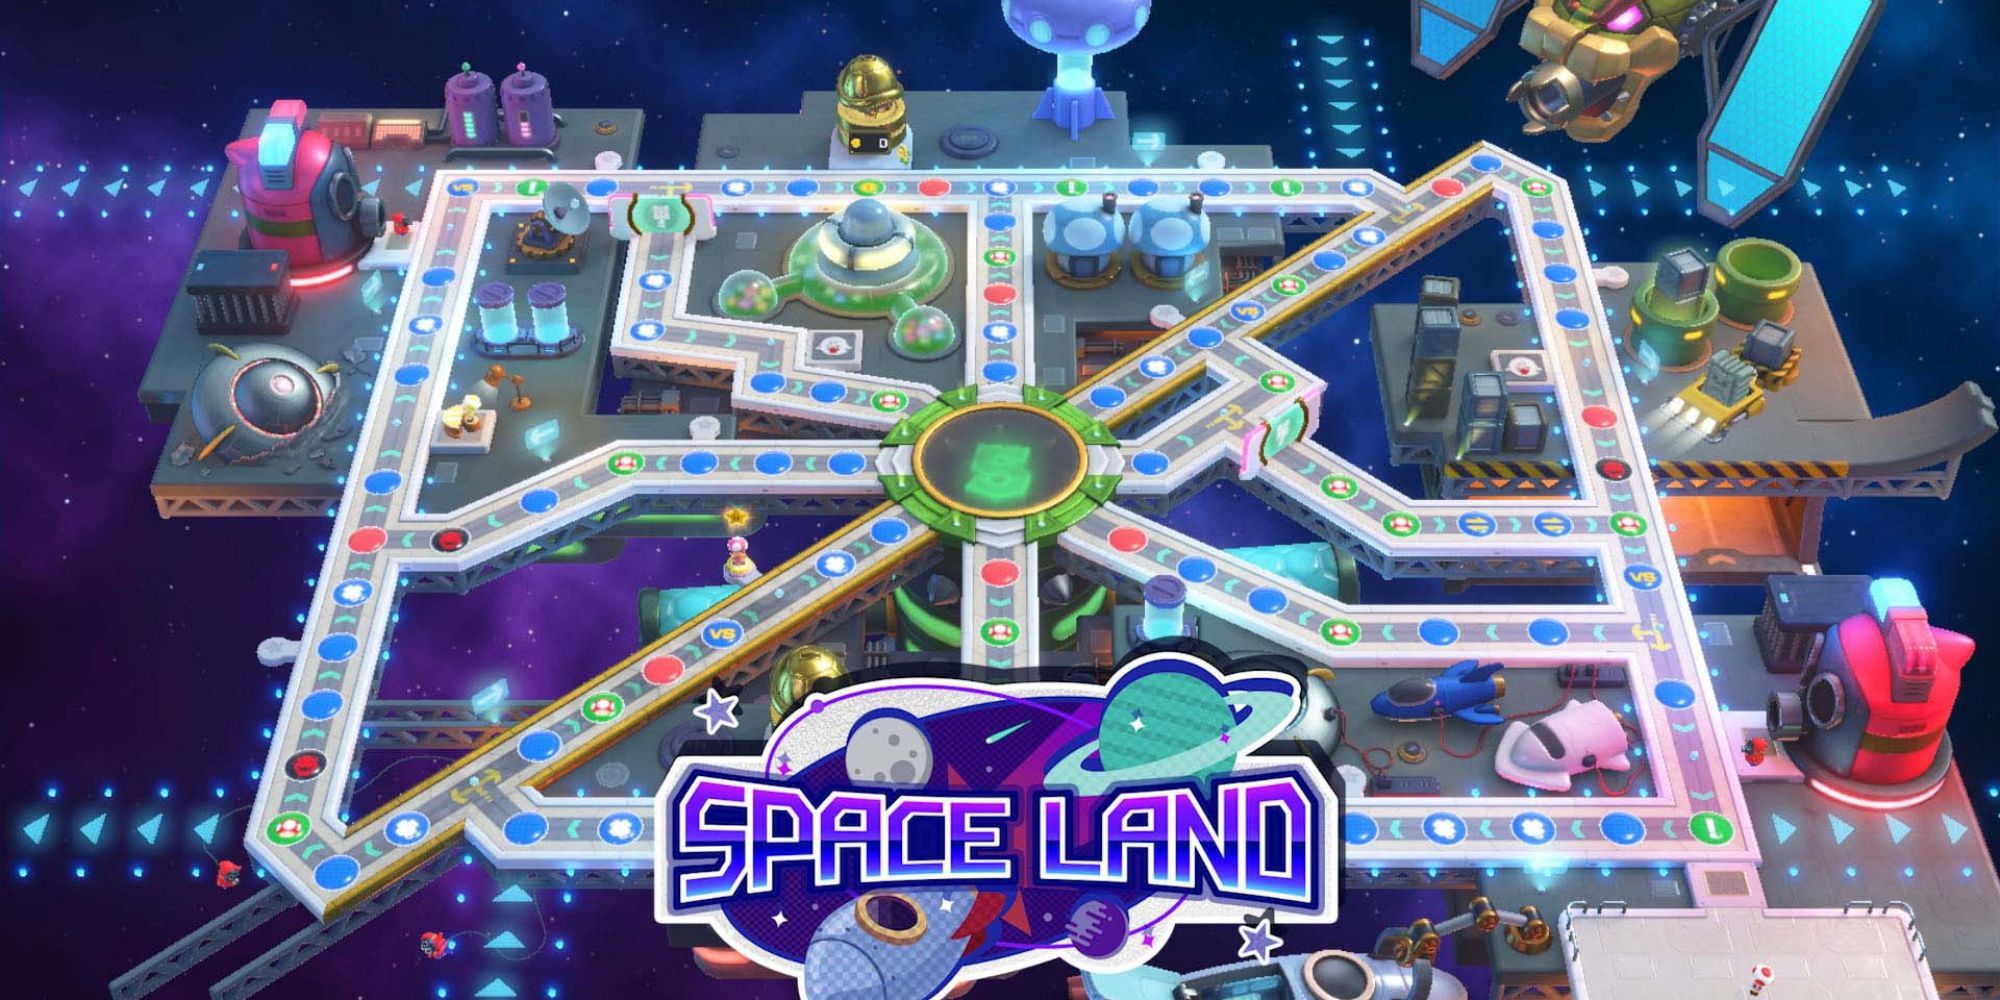 The Space Land Board in Mario Party Superstars